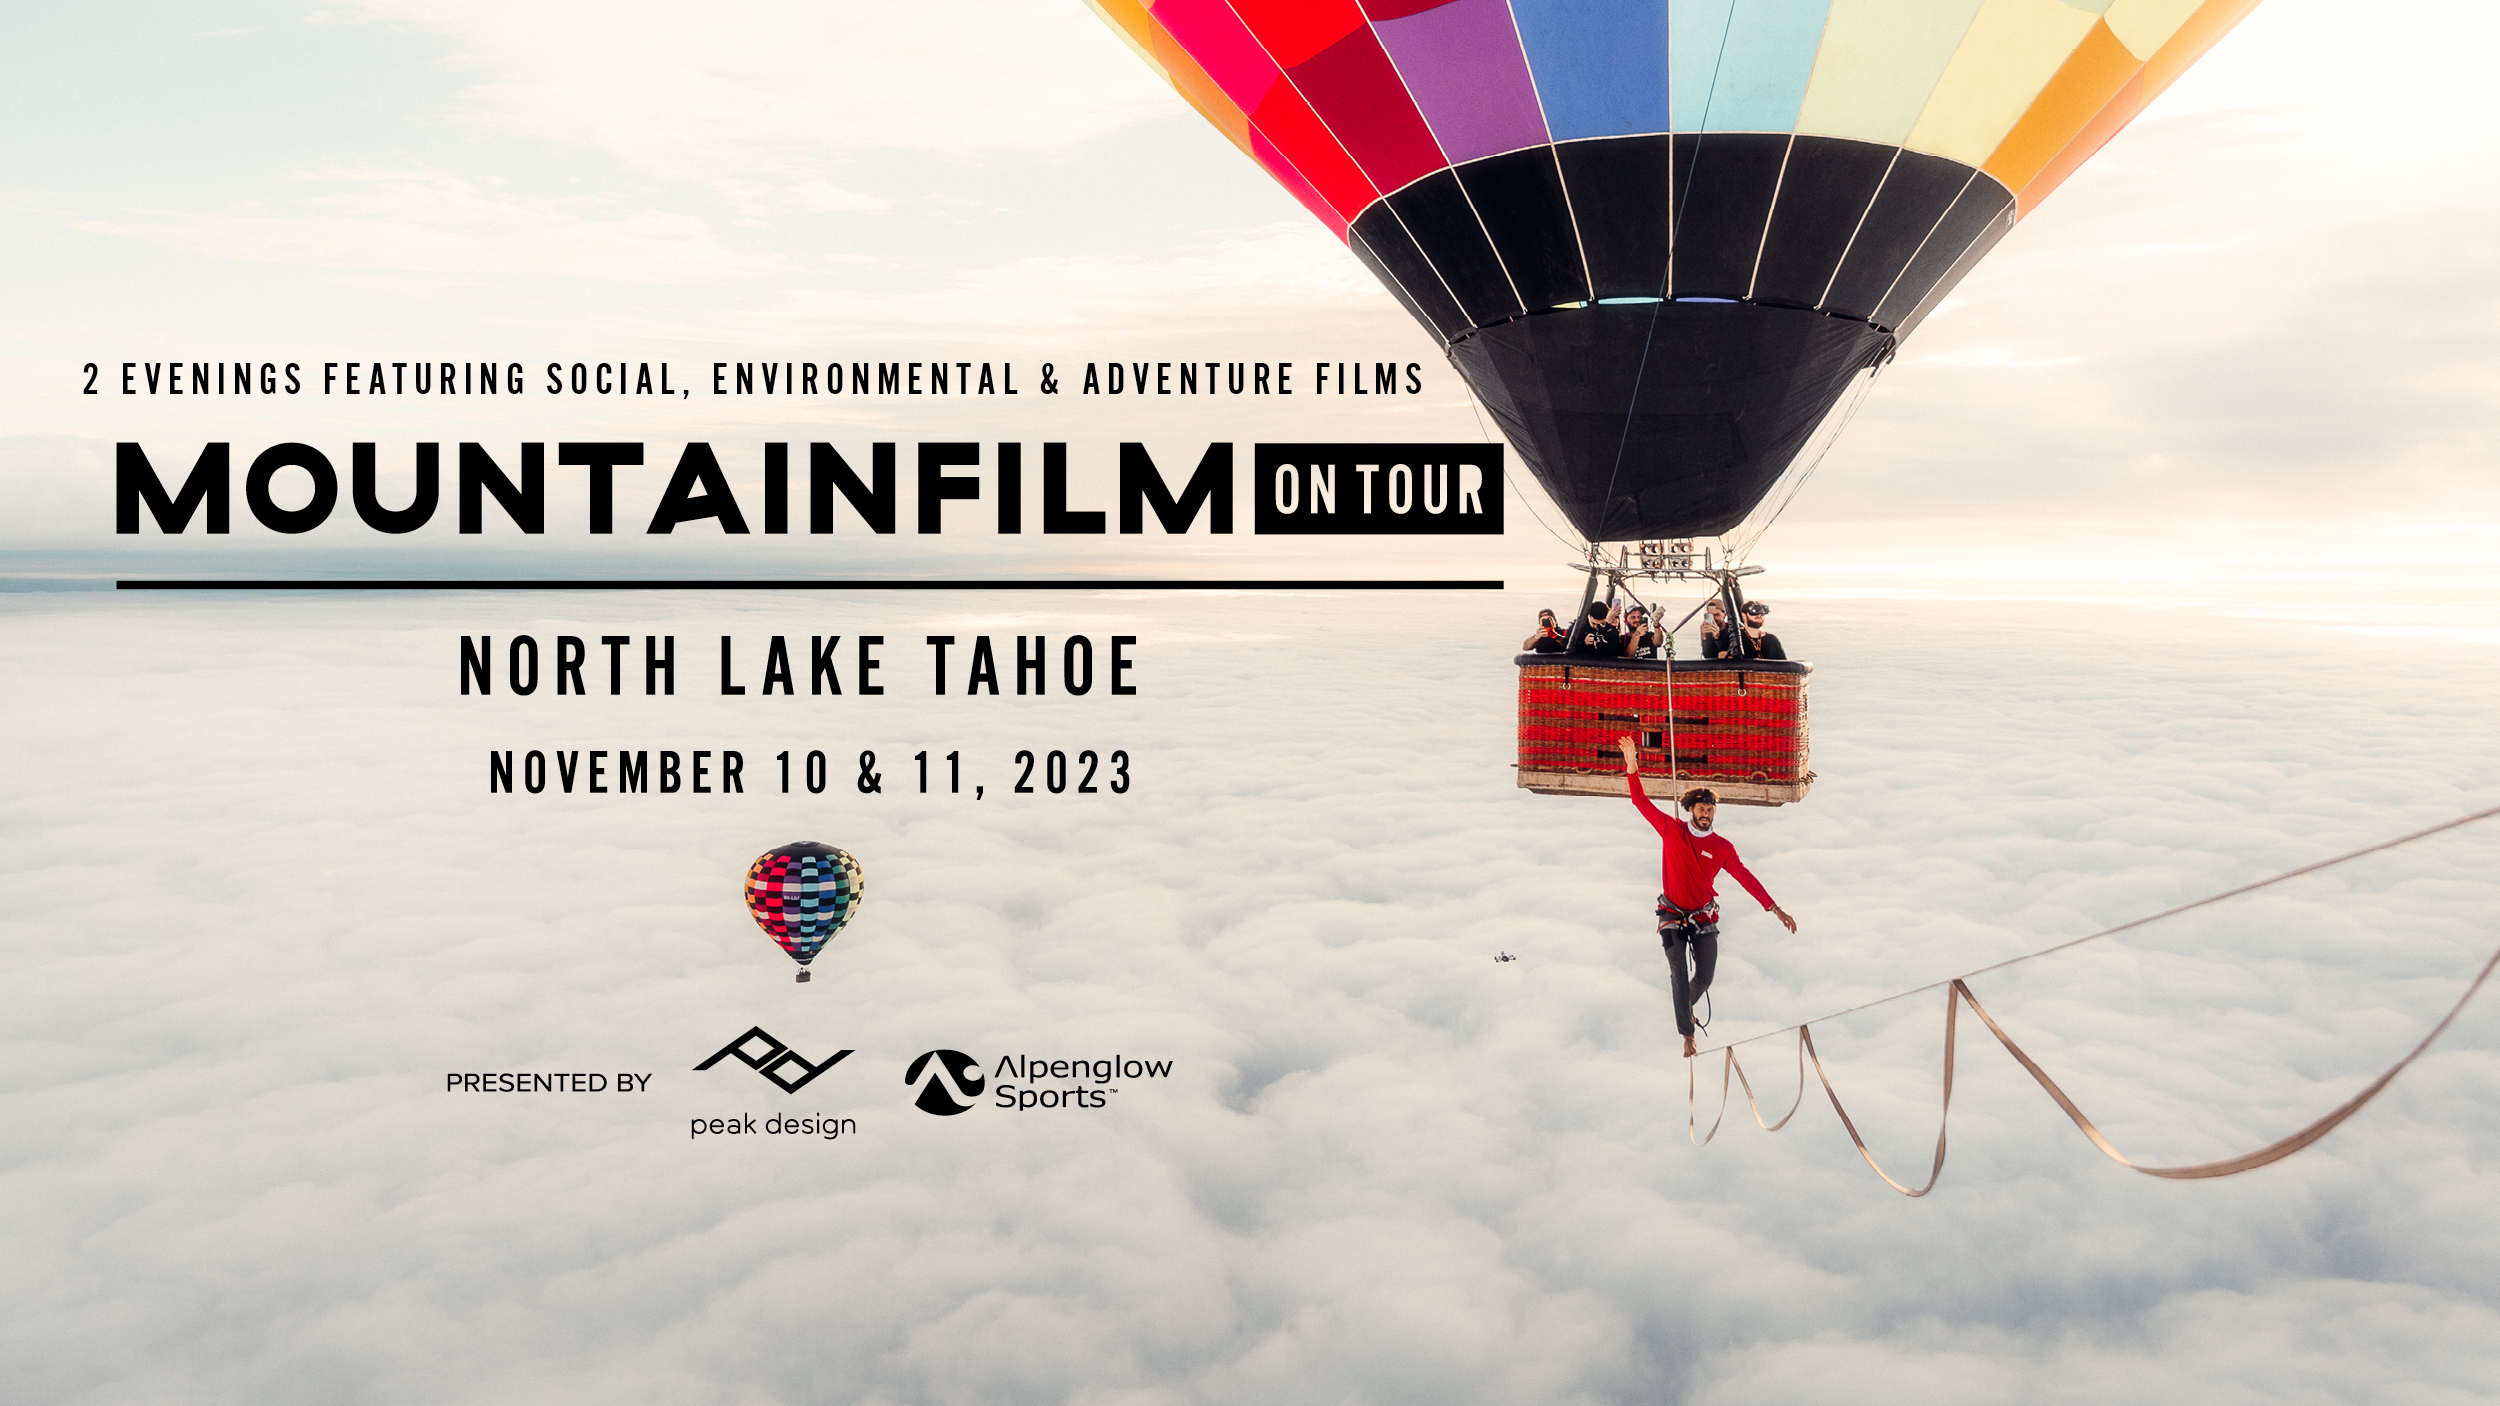 Mountainfilm On Tour Ad - 2 Evenings Featuring Social, Environmental, & Adventure Films